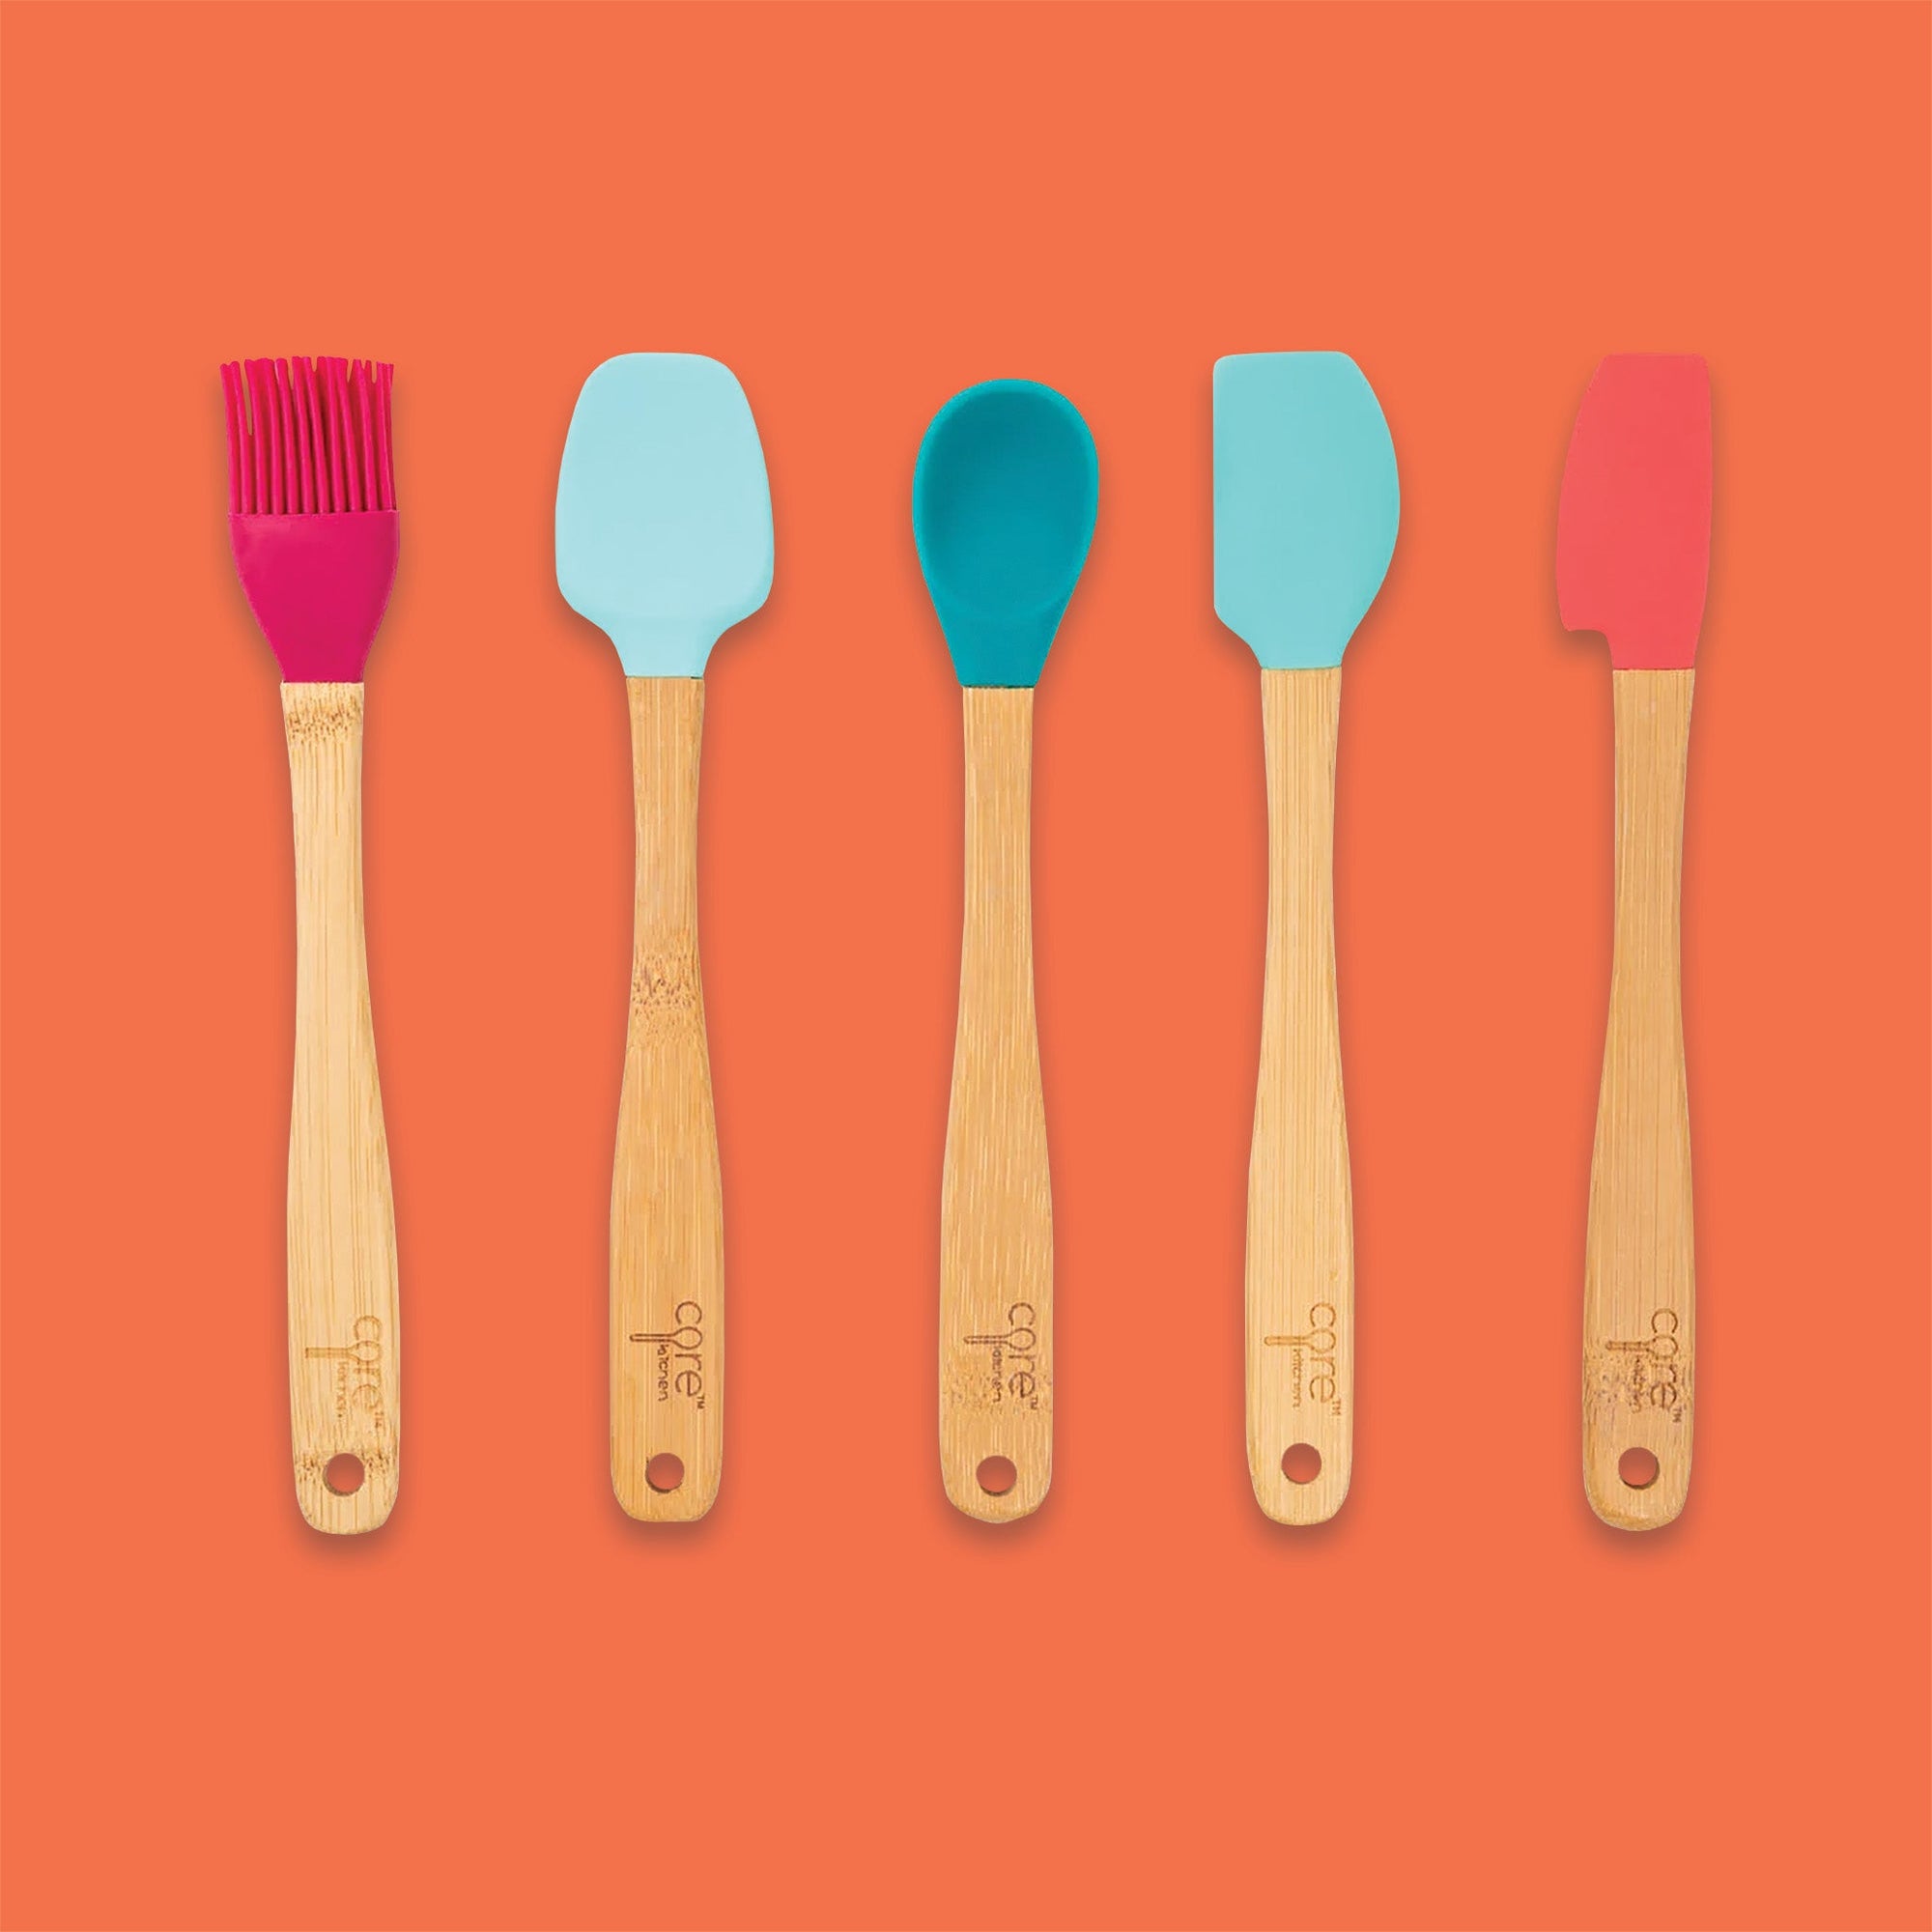 On an orangey background sits a set of five mini utensils. These mini utensils are made of bamboo and silicone. The silicones are in different colors of red-pink, light blue, teal, light teal, and coral.